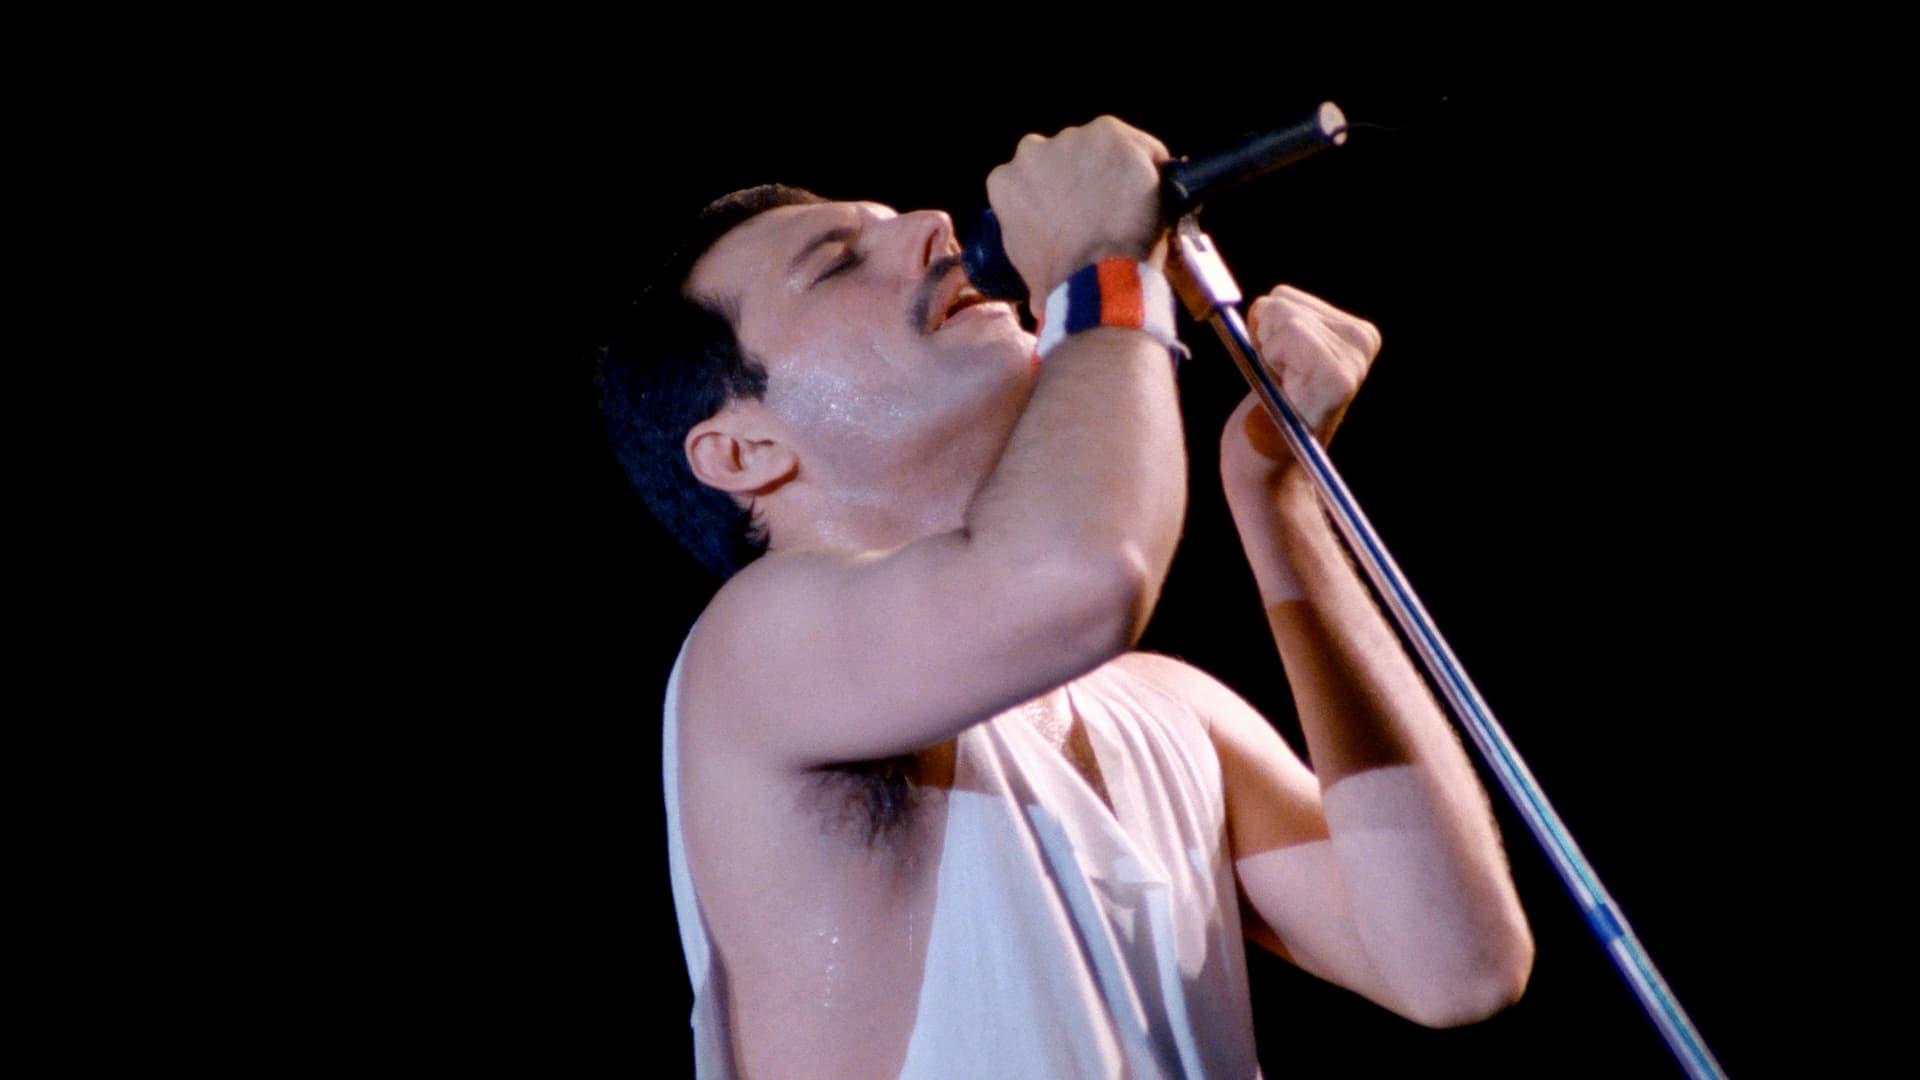 Queen: Hungarian Rhapsody - Live in Budapest '86 backdrop